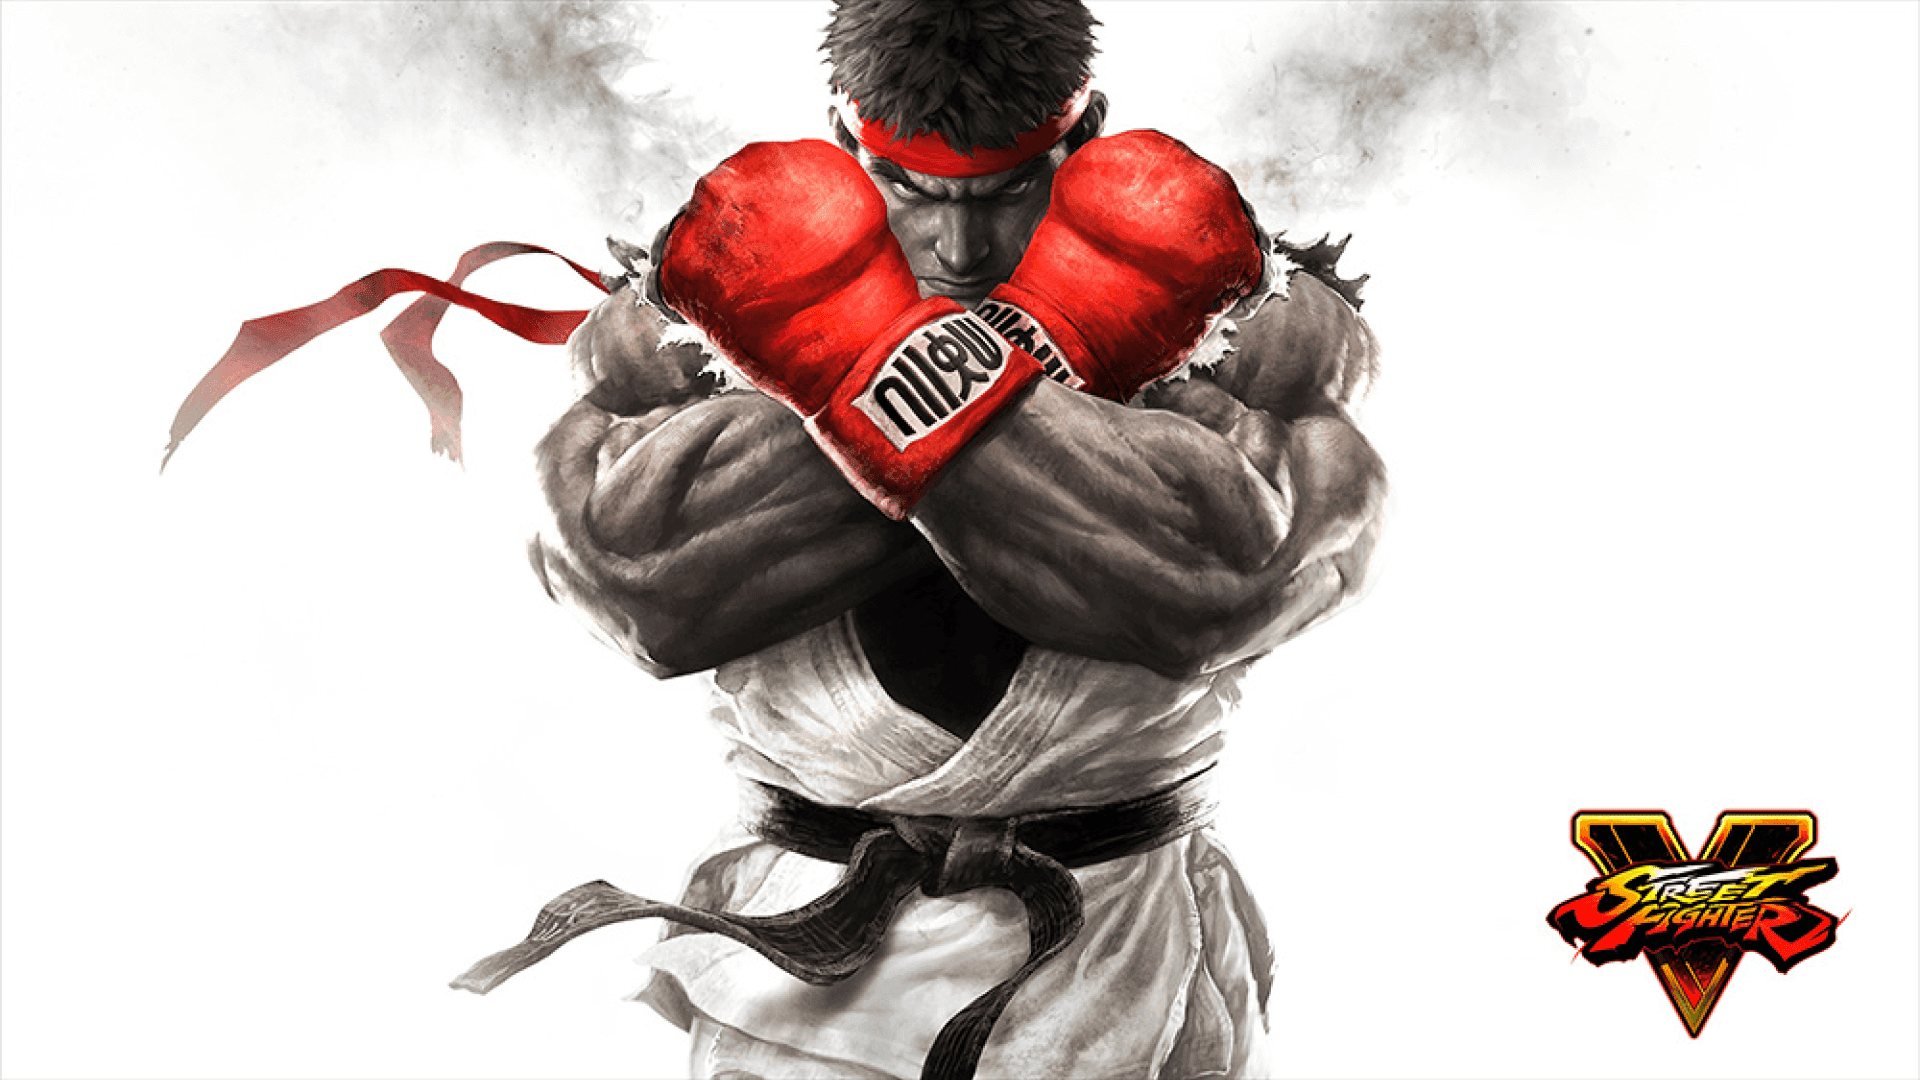 Street Fighter V feature image